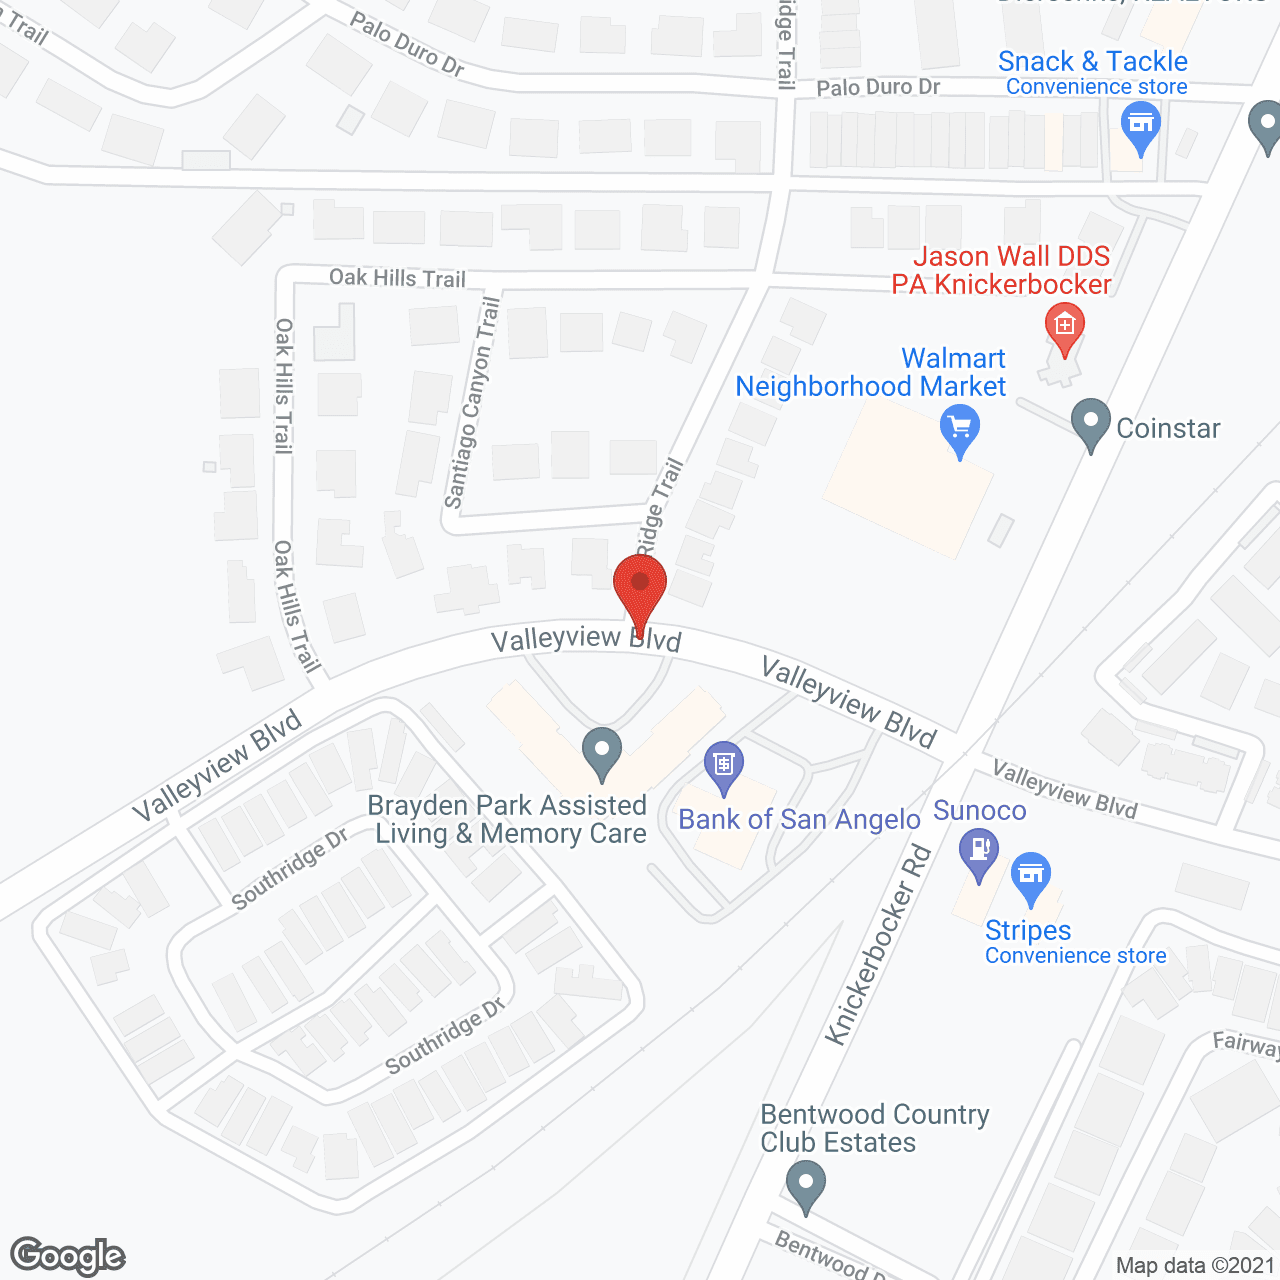 Brayden Park Assisted Living and Memory Care in google map